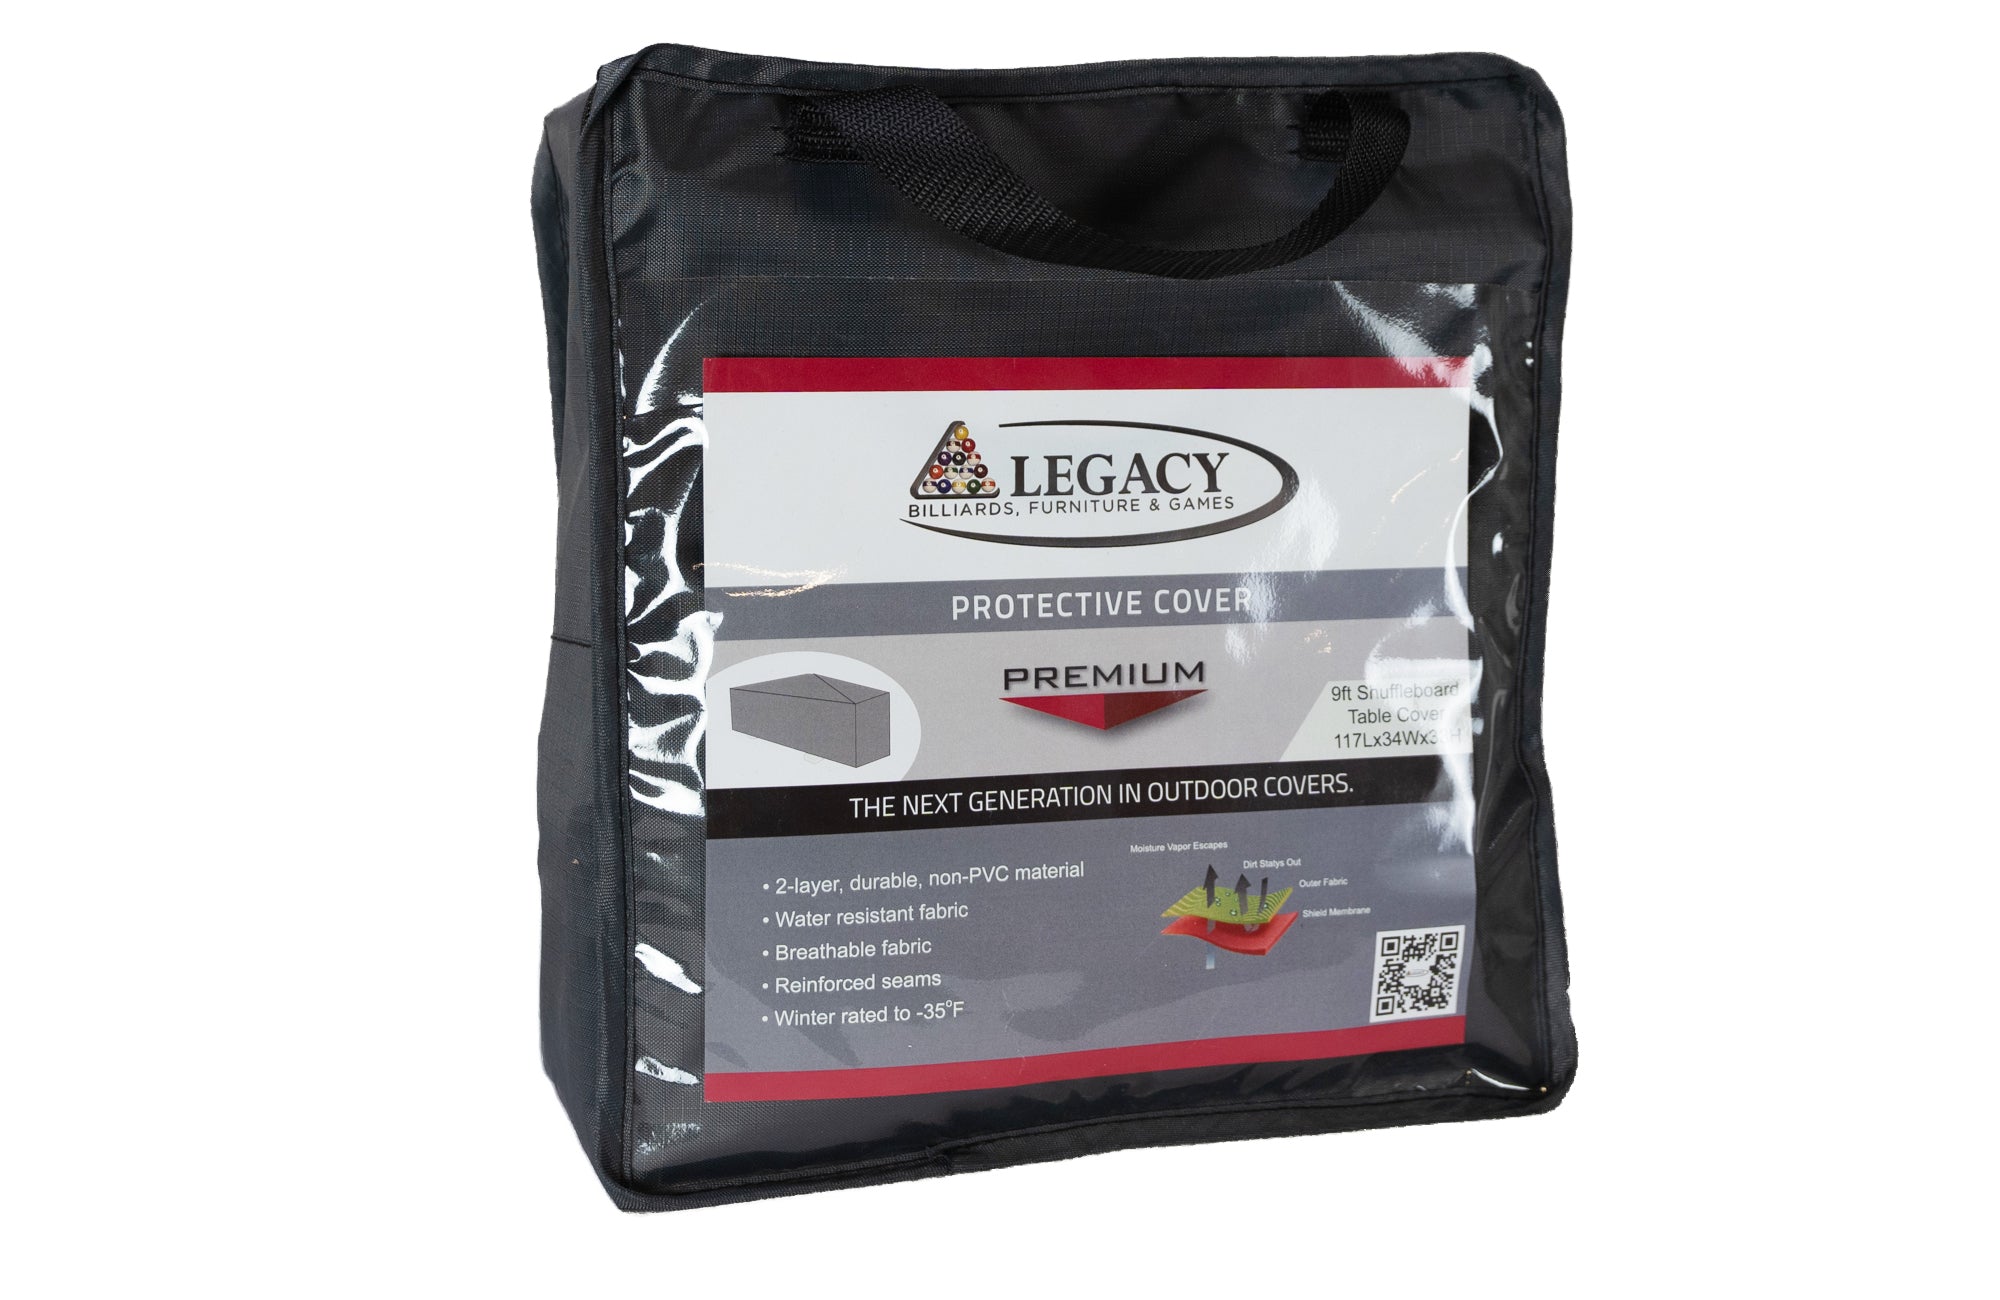 Legacy Billiards Outdoor Waterproof Cover for Pool Tables Packaging